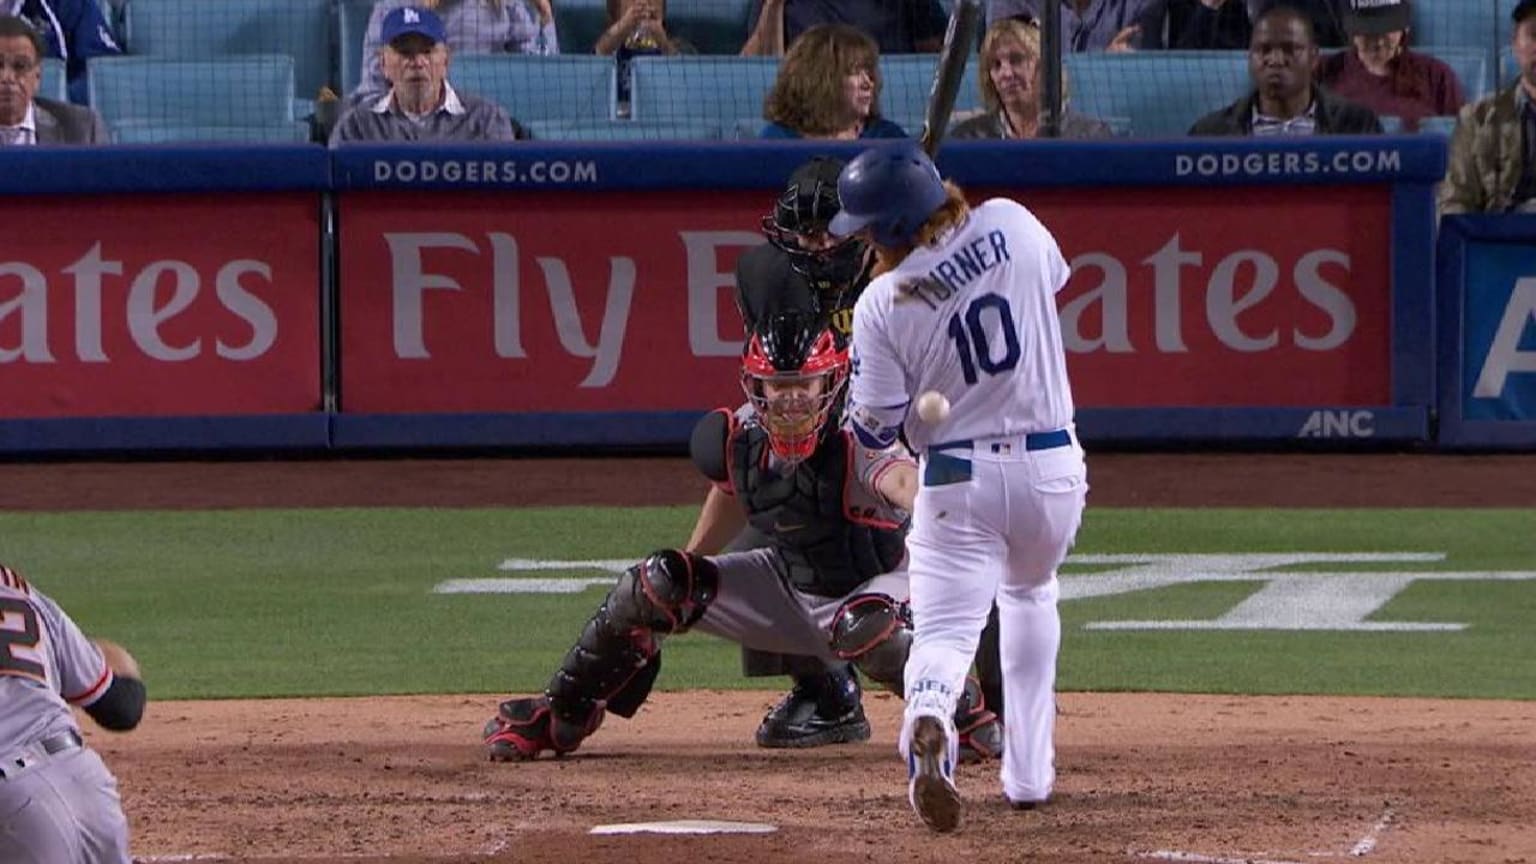 Justin Turner Posts Gruesome Photos of Face After Getting Hit by a Pitch